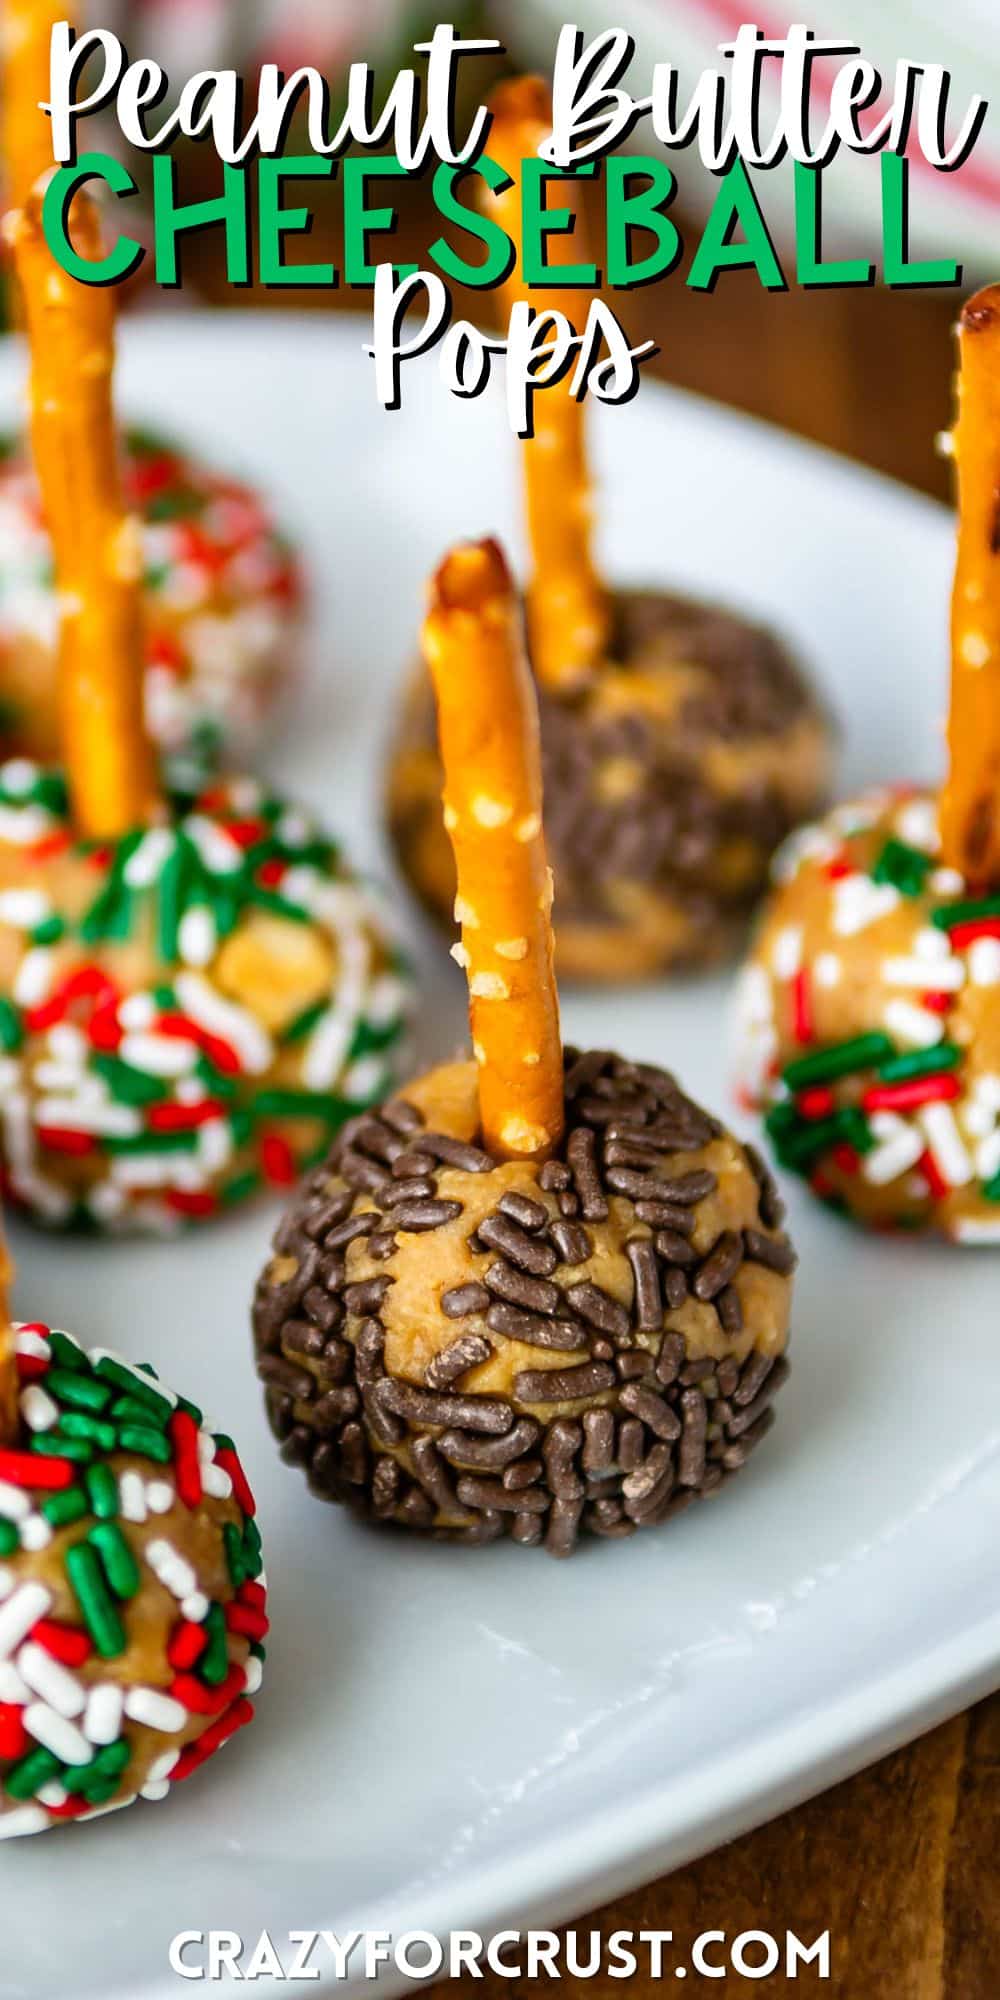 peanut butter balls with sprinkles pressed in the side on a pretzel stick with words on the image.